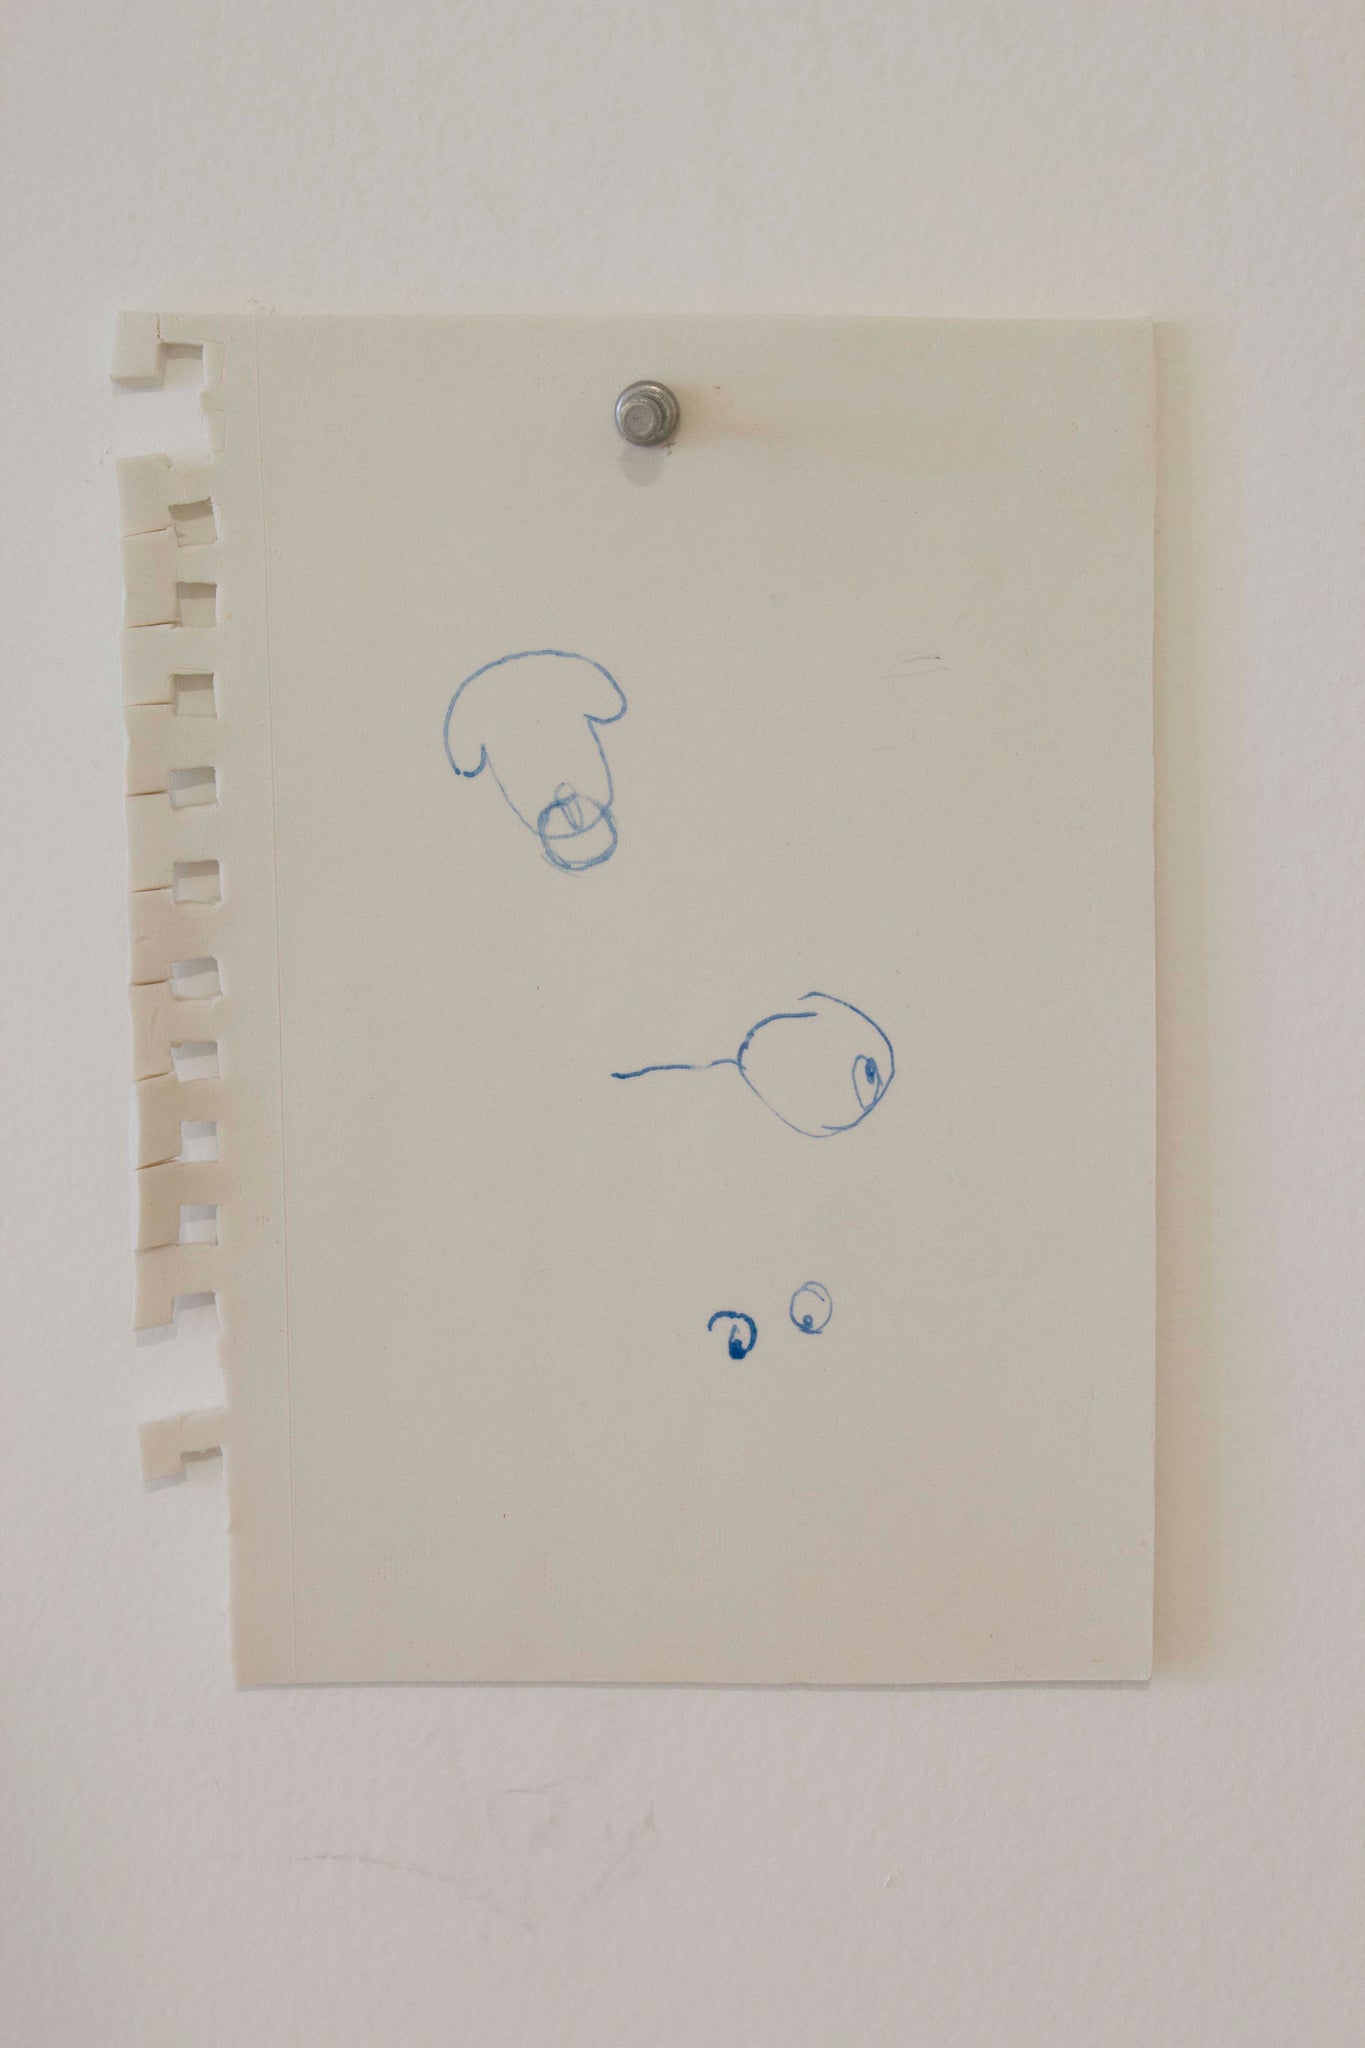 Shelby David Meier, "Sketchbook Page (Pictionary)"